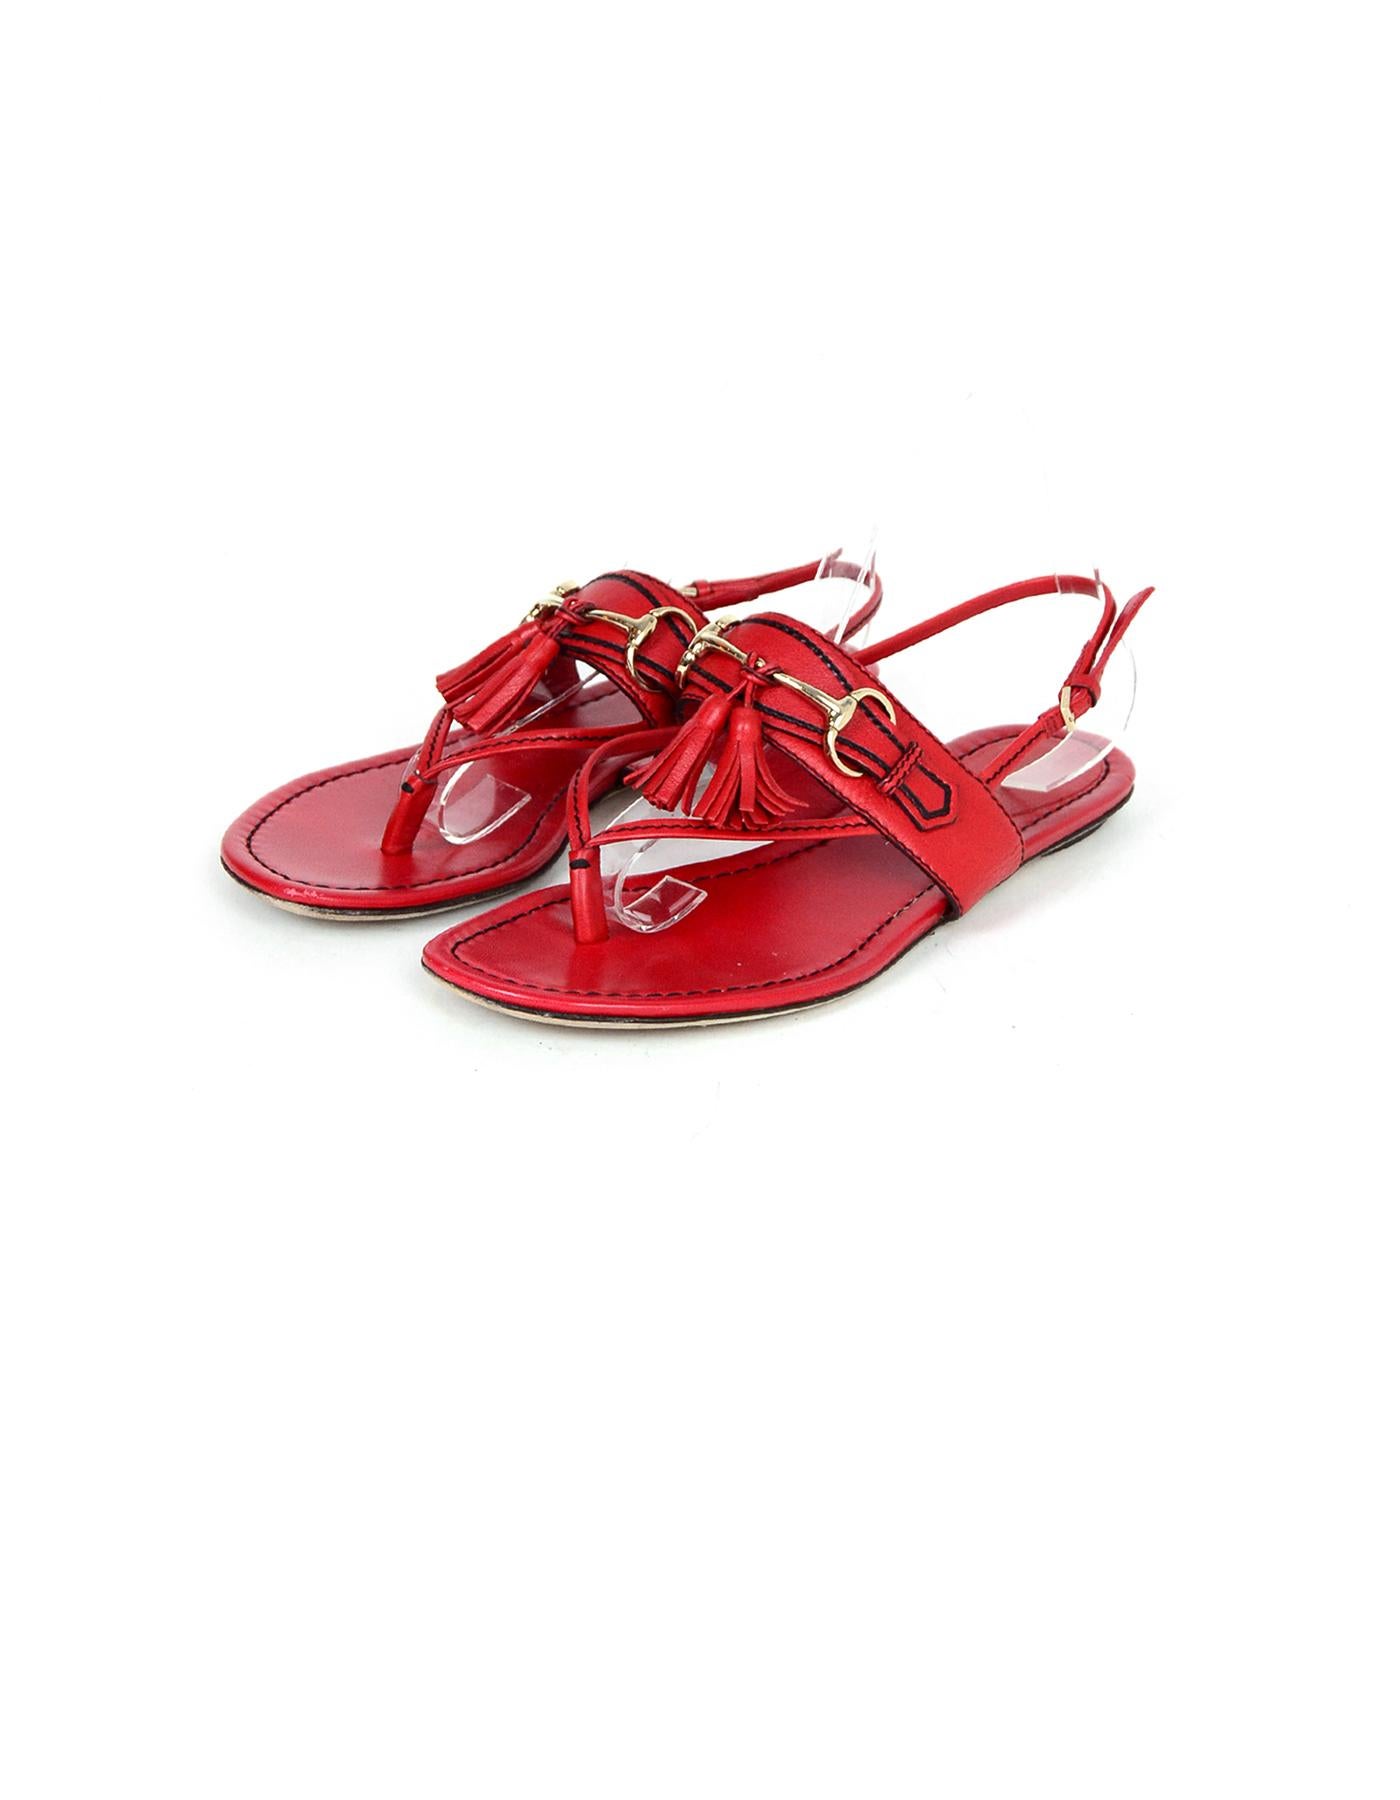 Gucci Red Leather Thong Flat w/ Bit and Tassel sz 38

Made In: Italy
Color: Red
Hardware: Silvertone
Materials: Leather
Closure/Opening: Side buckle
Overall Condition: Very good pre-owned condition, wear on soles and color transfer on insoles.